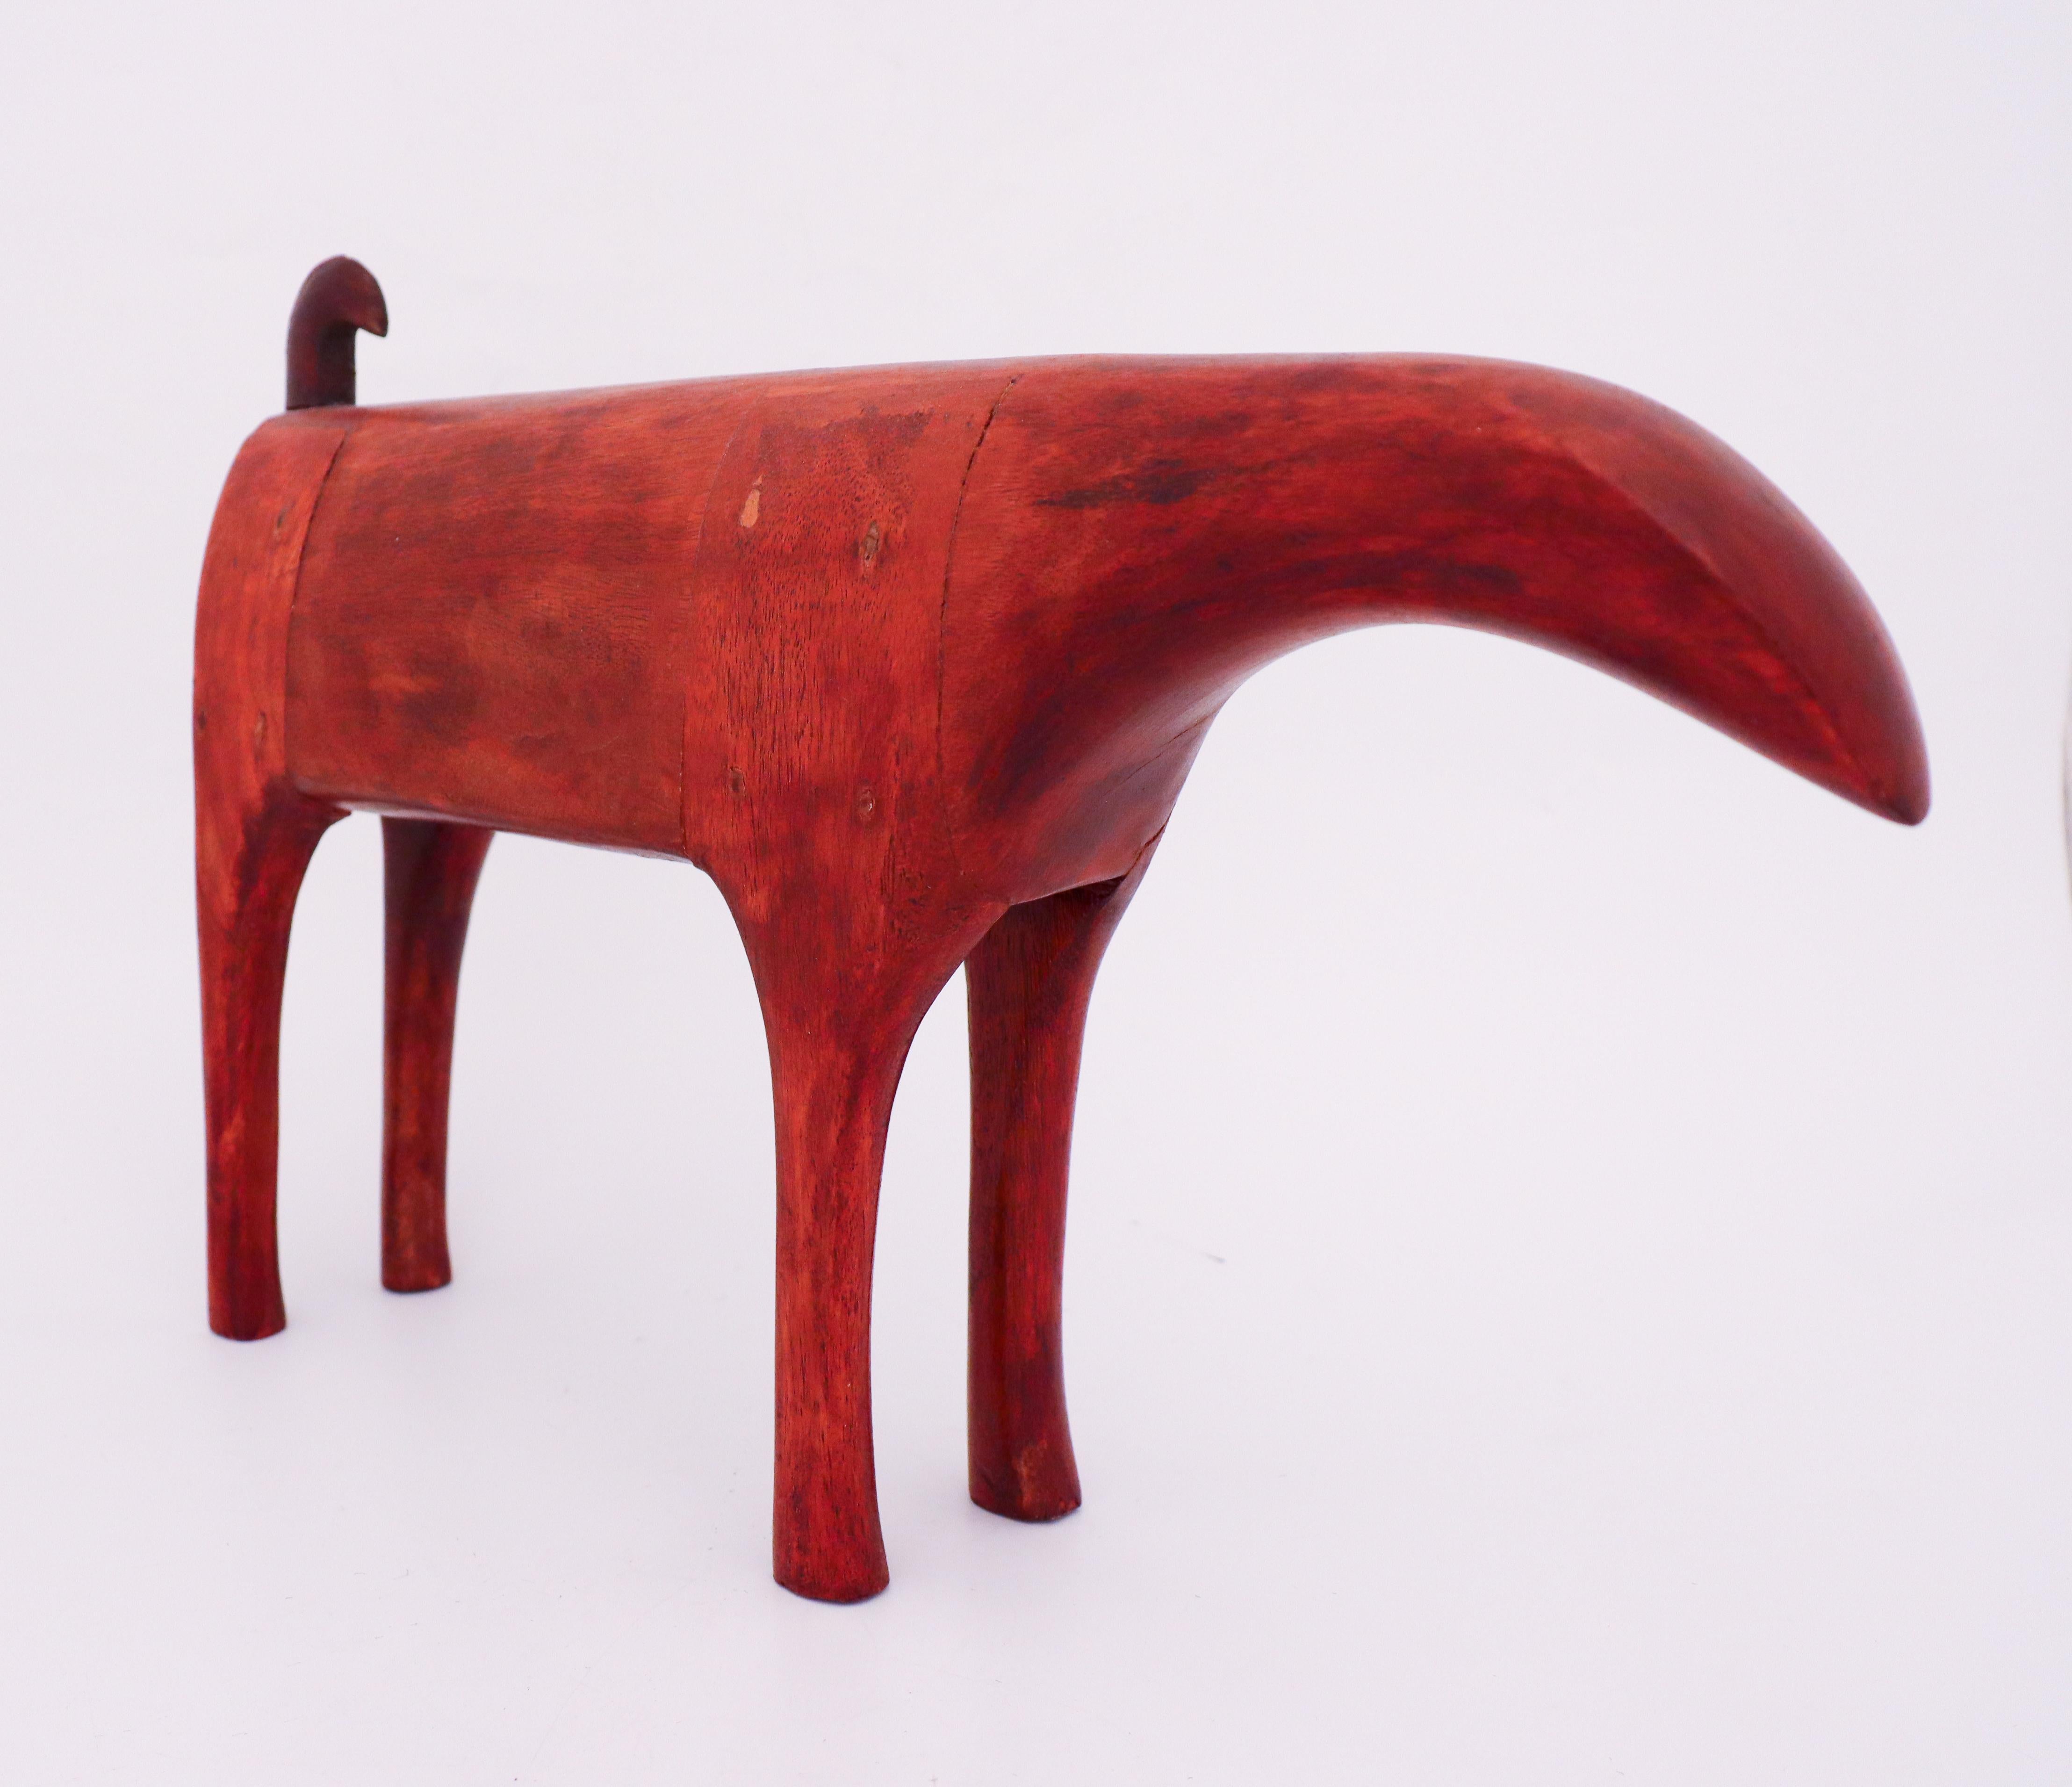 A lovely wooden sculpture designed in Sweden in the midcentury. It is in very good condition except from that one of its legs is repaired. The designer is unknown.